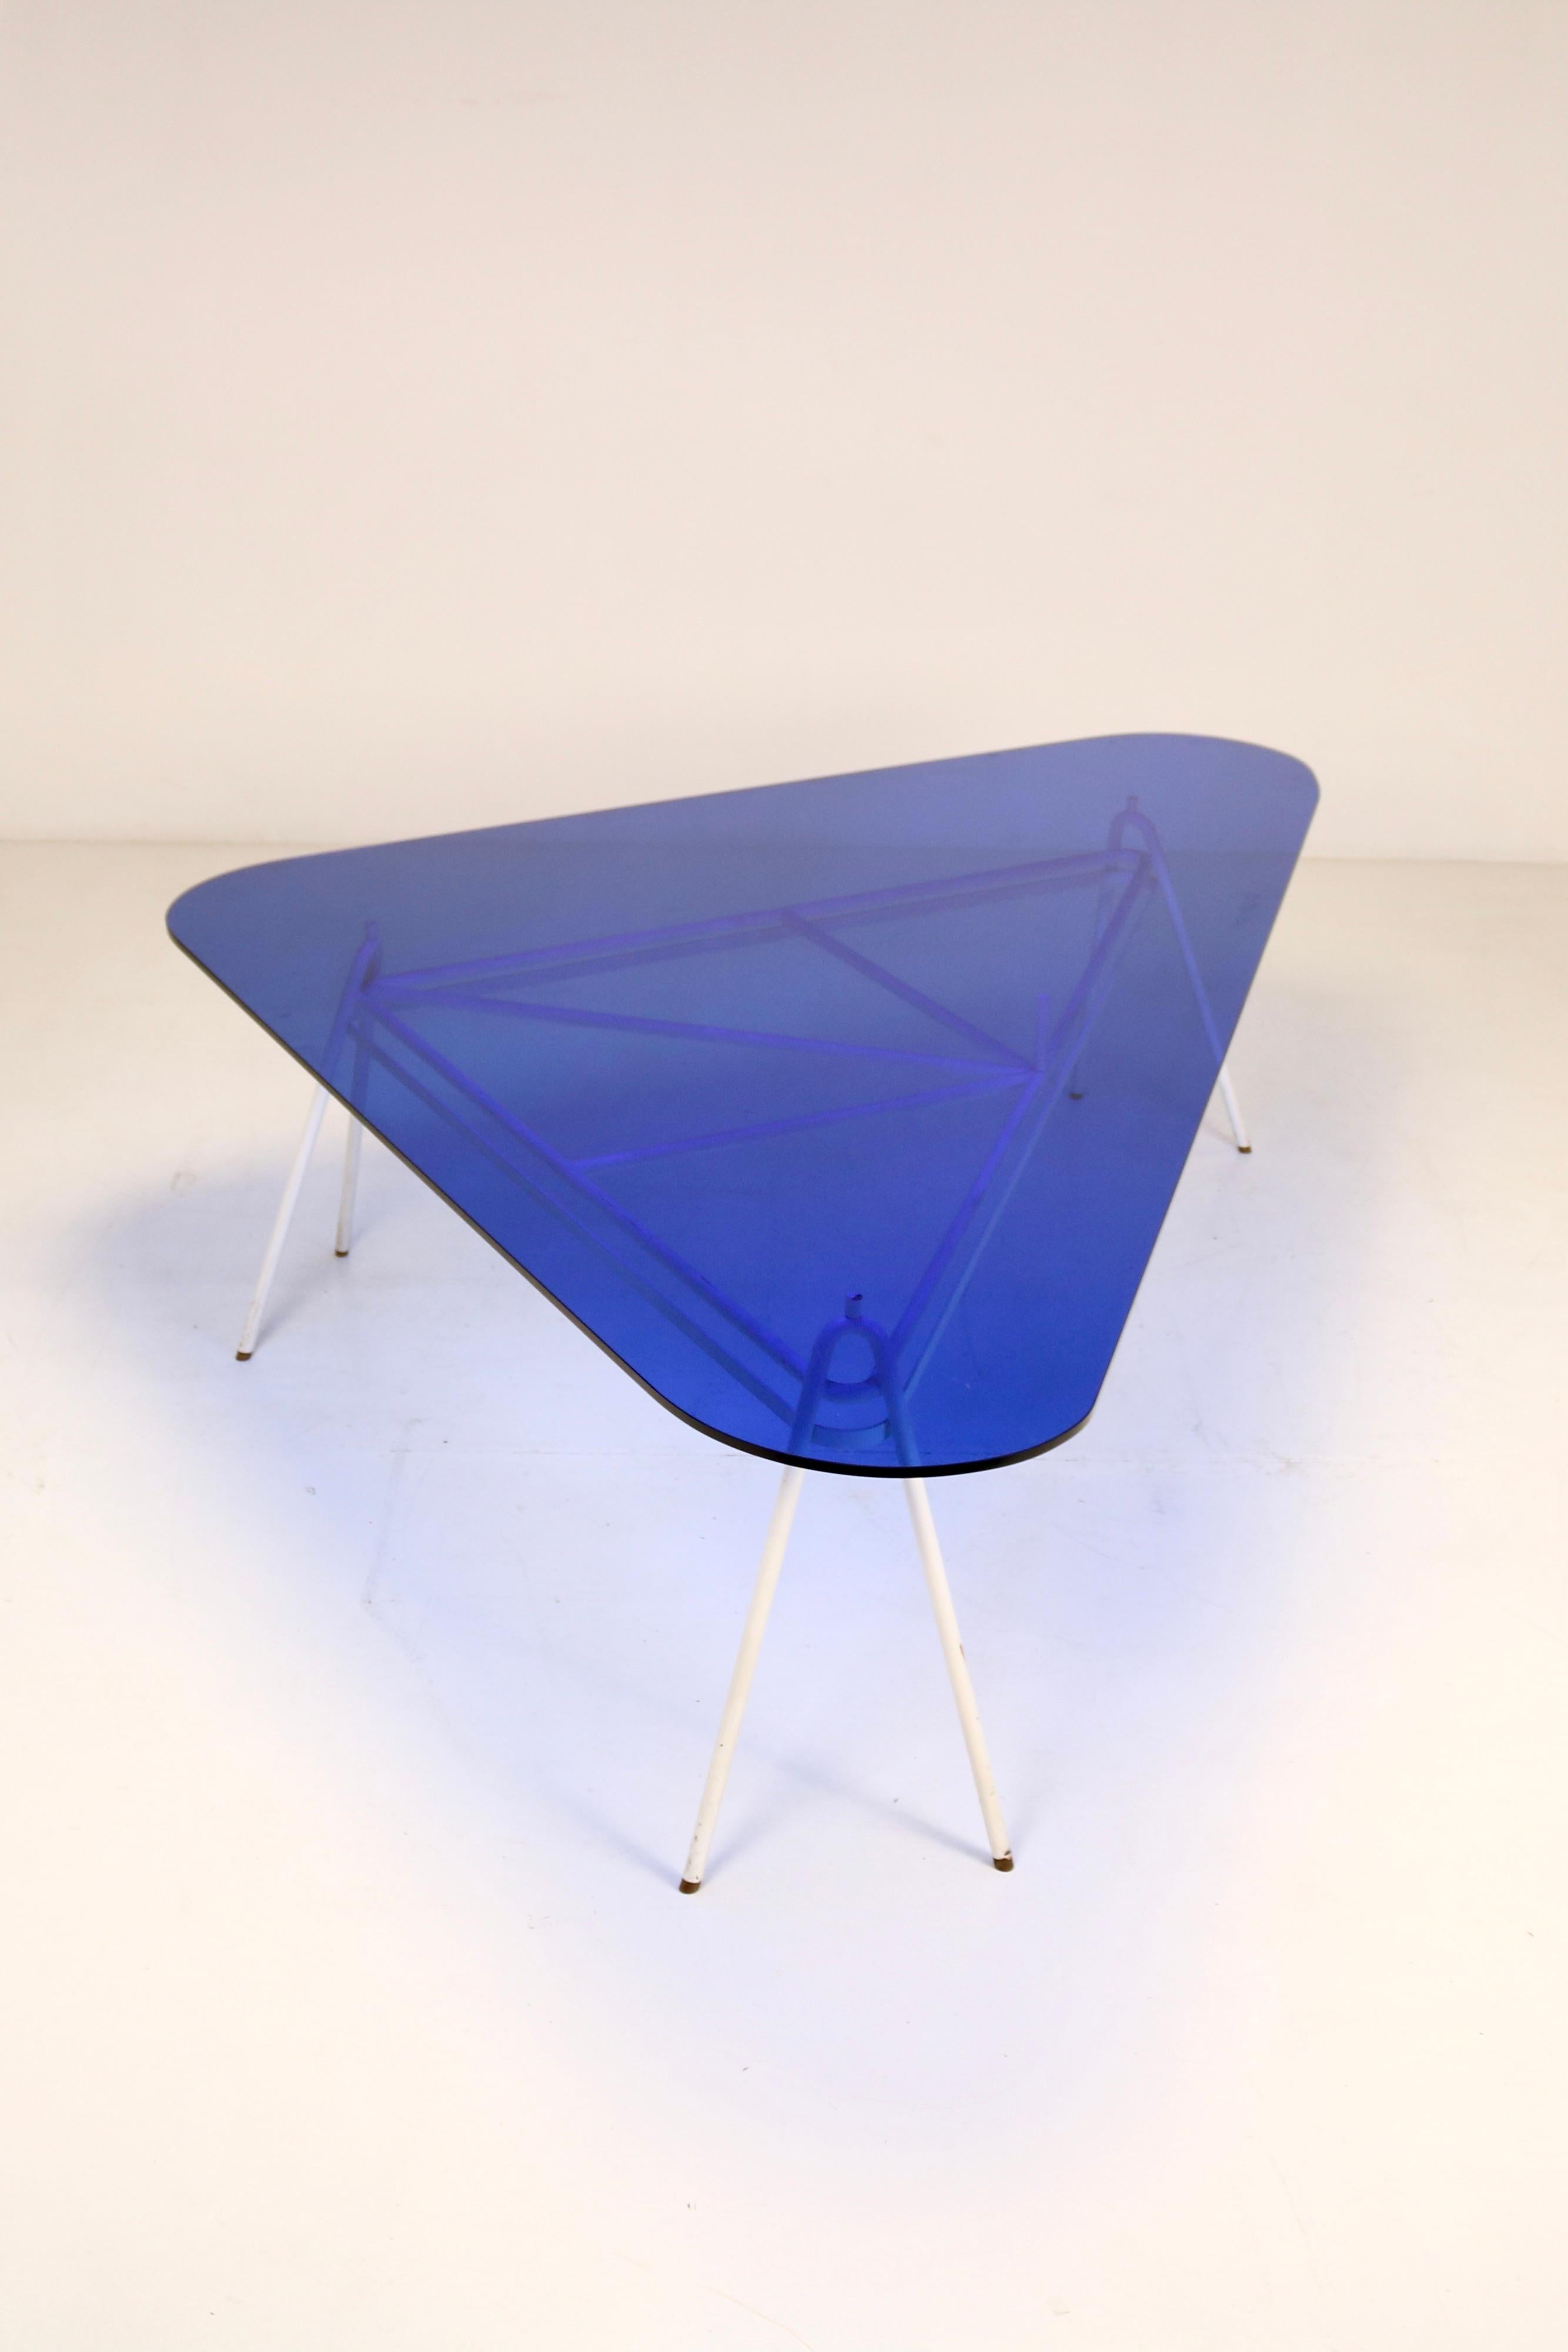 Late 20th Century Important Glass Table in Blue by Guido Buratti, 1980s